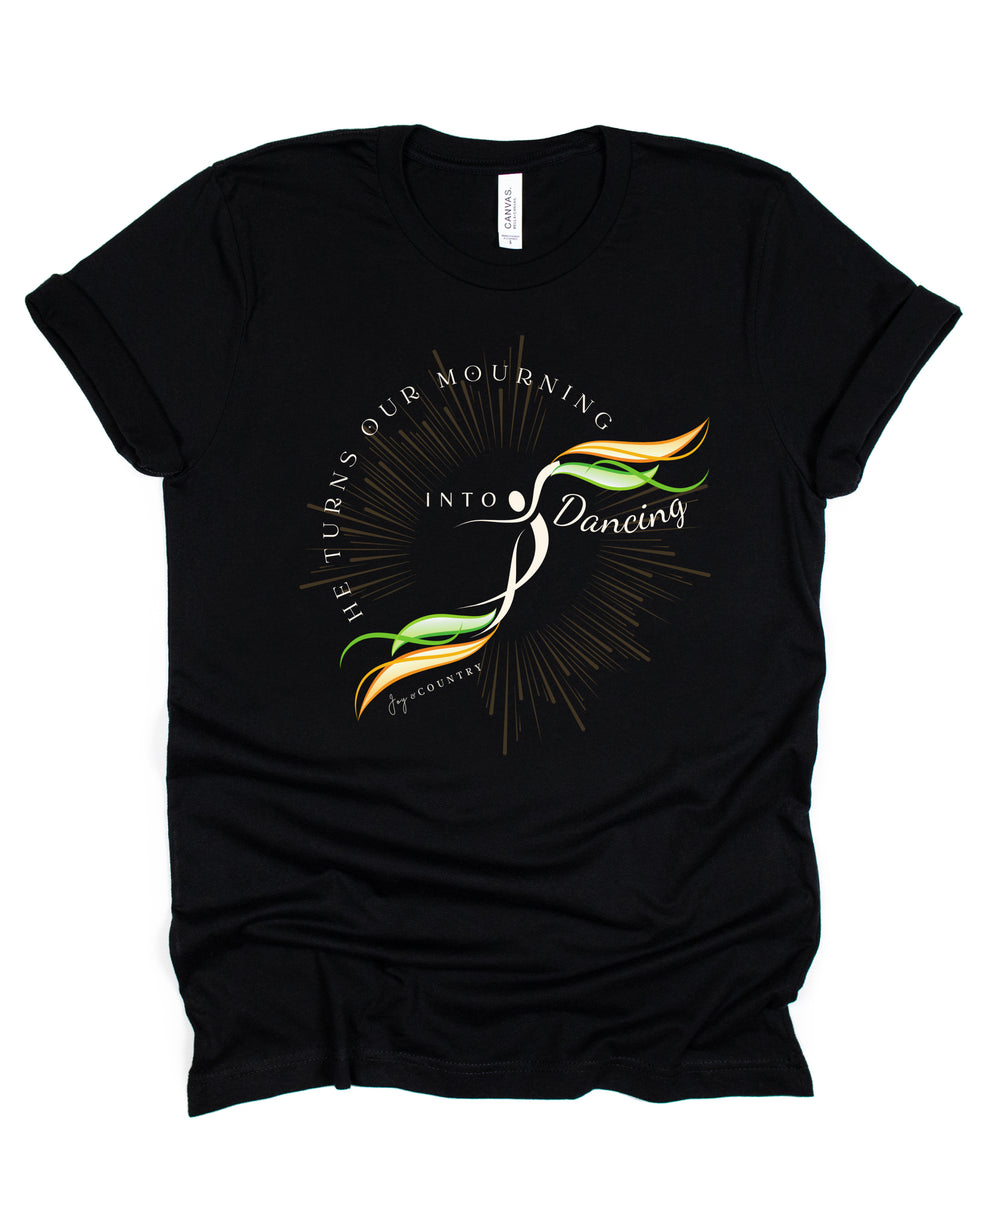 He Turns Our Mourning into Dancing - Unisex Crew-Neck Tee - Joy & Country